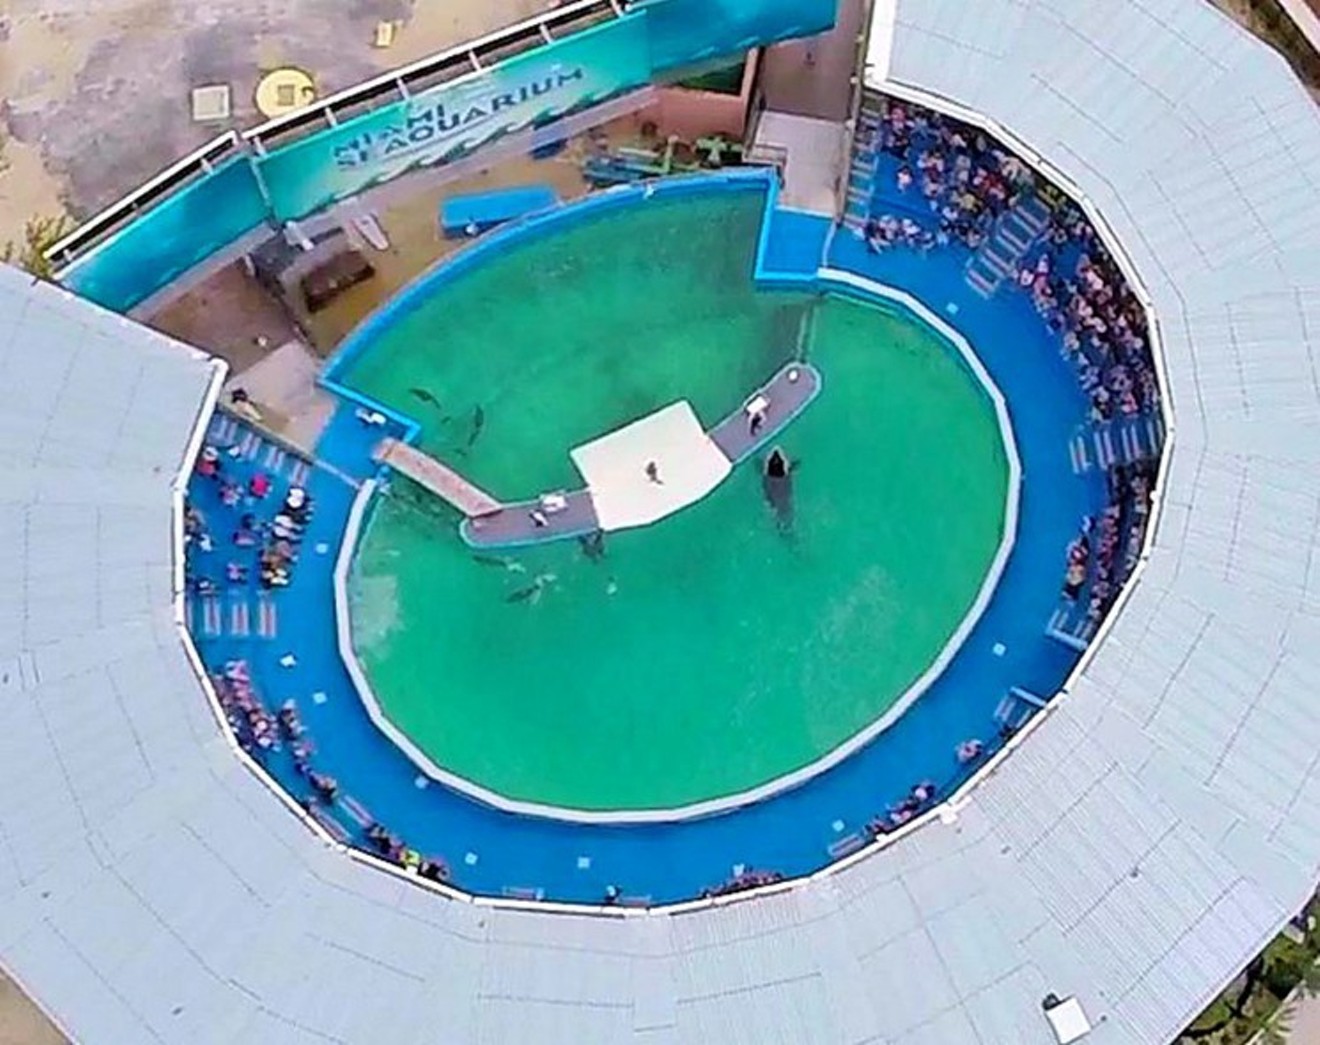 Lolita the orca has lived in this tank for more than 45 years.